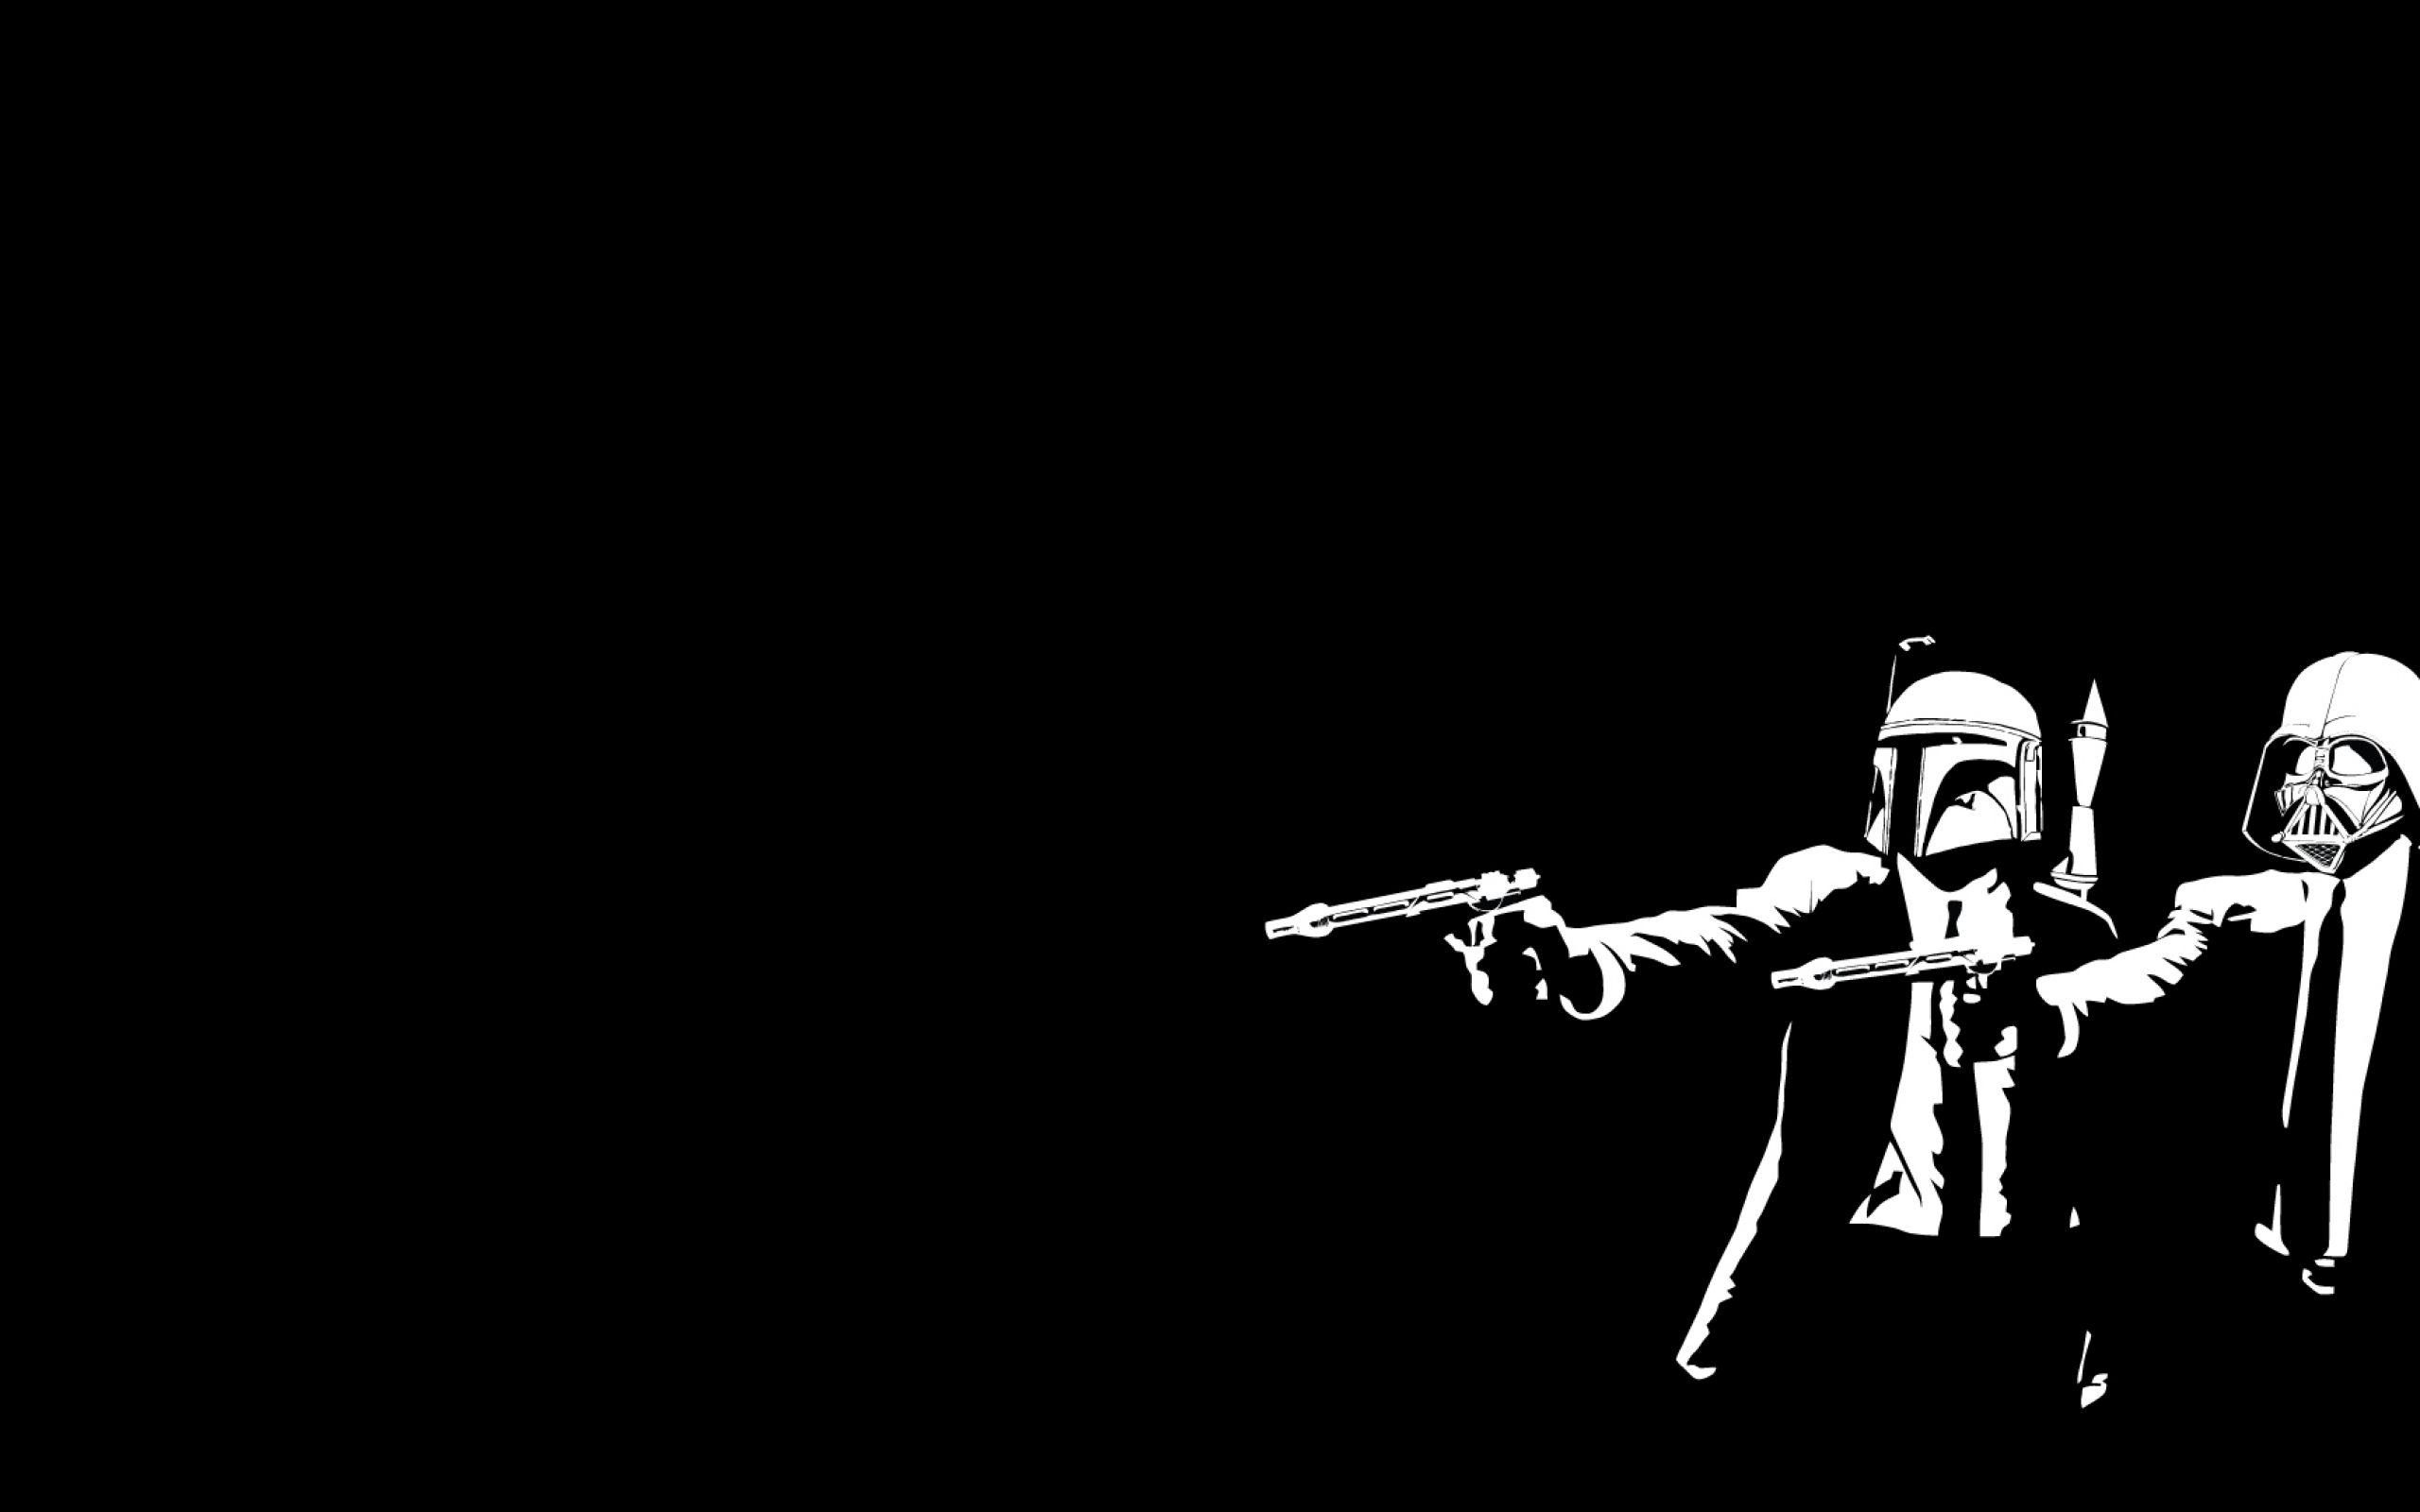 Star Wars Pulp Fiction Crossovers Black Background